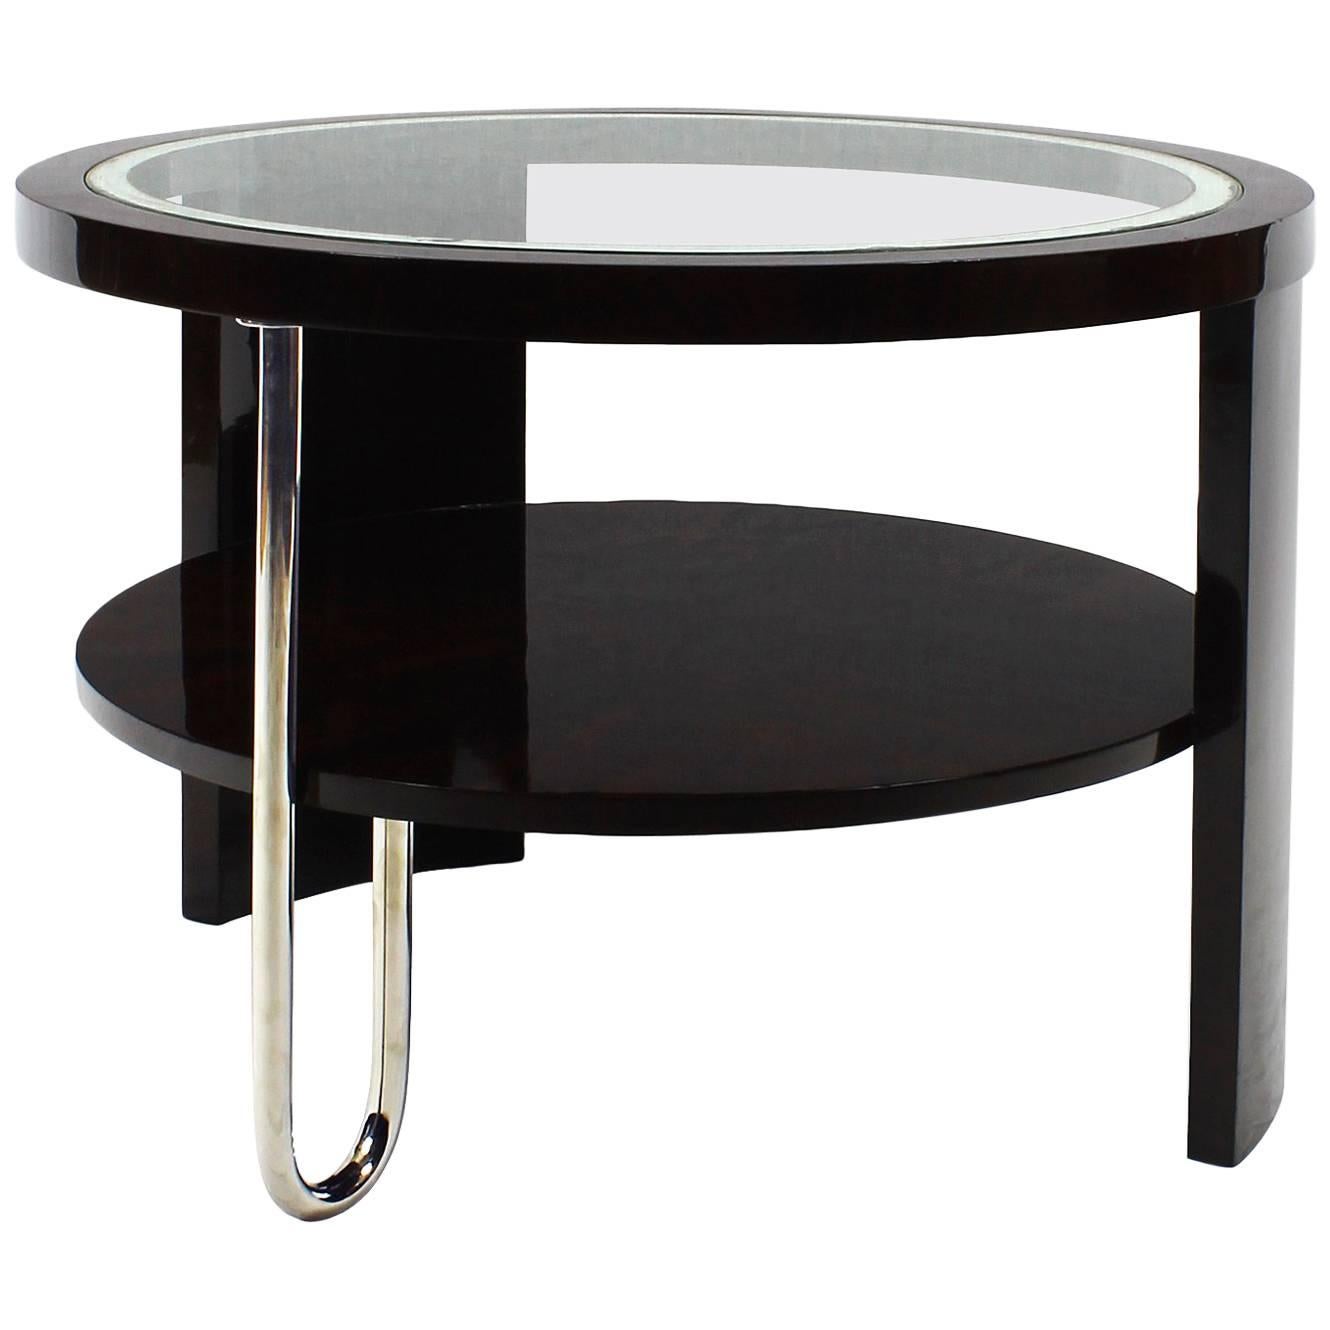 1930s Art Deco Tripod Side Table, Dark Rosewood, Chrome, Glass, Marquetry, Italy